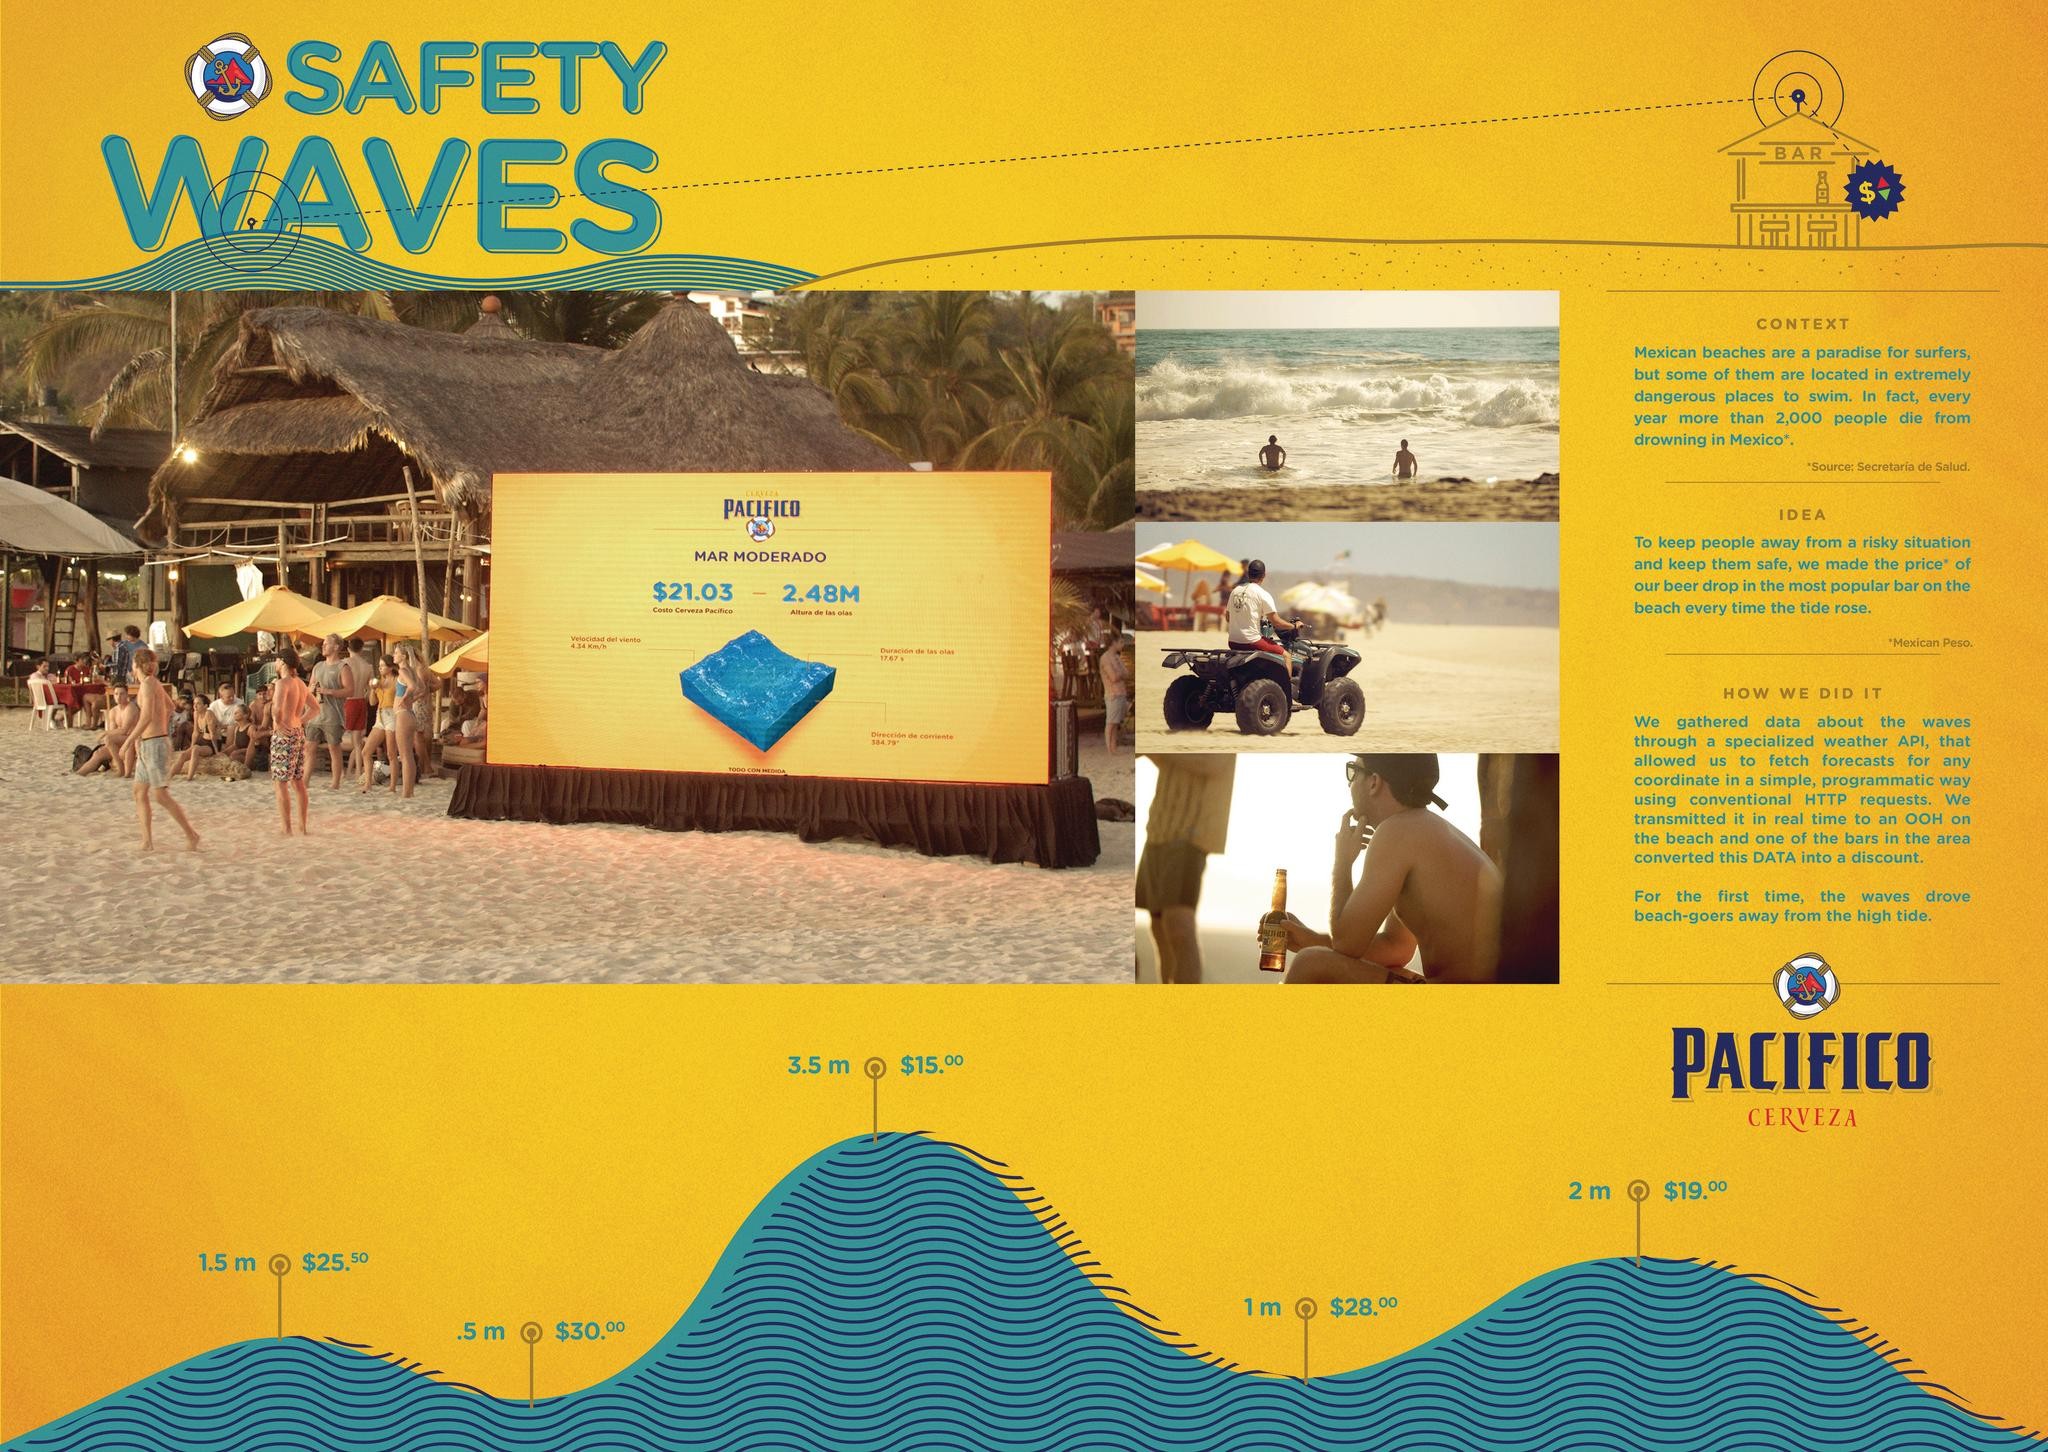 Safety Waves